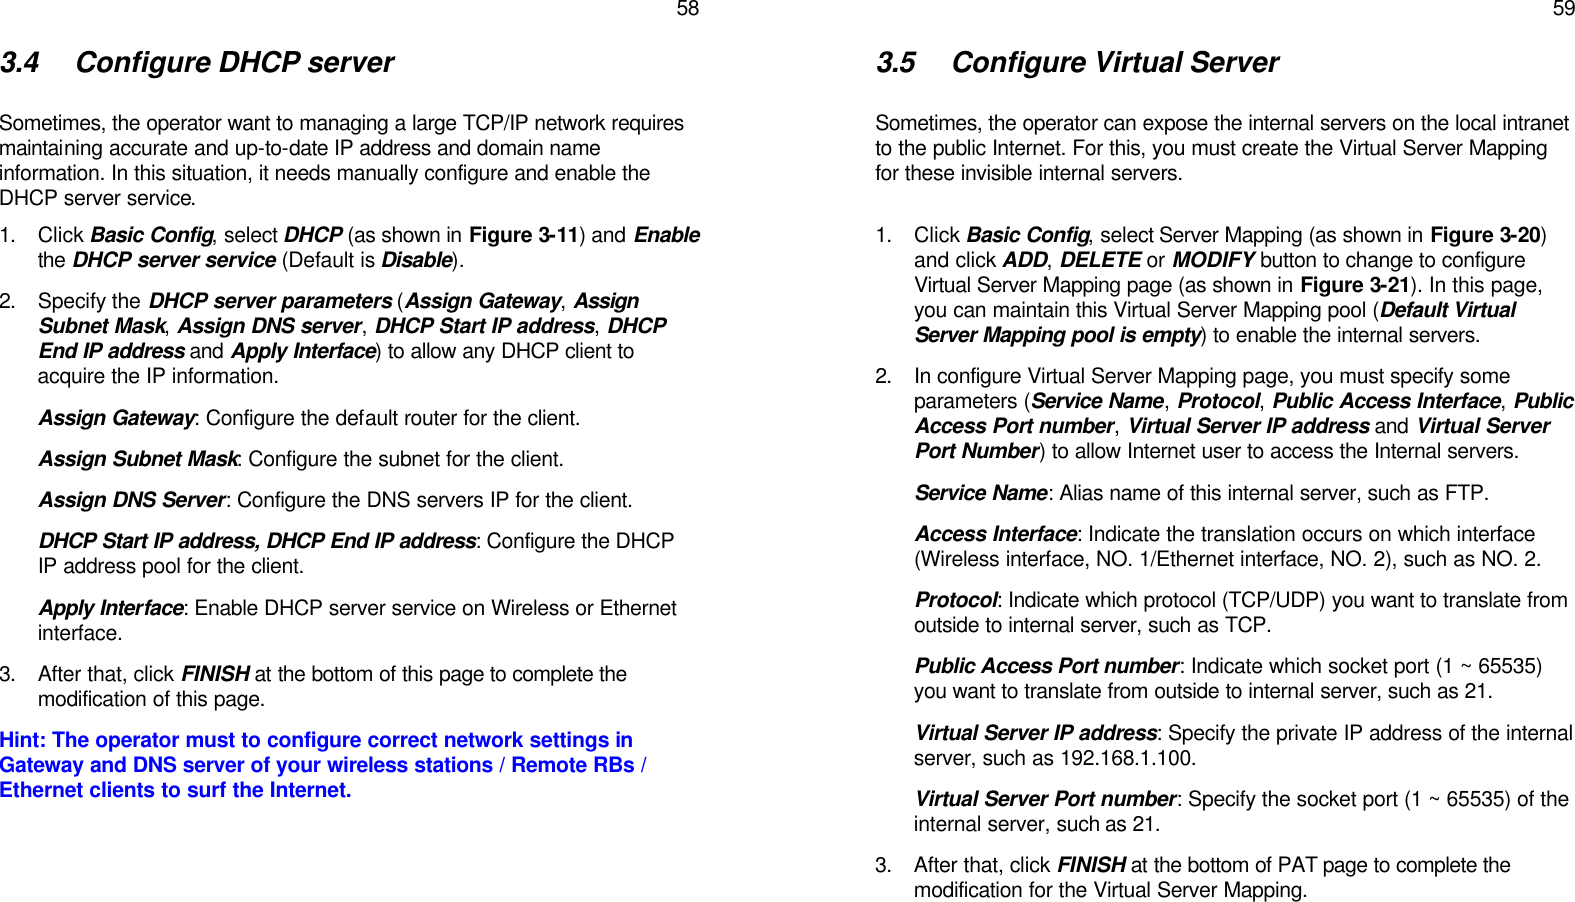   58 3.4 Configure DHCP server  Sometimes, the operator want to managing a large TCP/IP network requires maintaining accurate and up-to-date IP address and domain name information. In this situation, it needs manually configure and enable the DHCP server service. 1. Click Basic Config, select DHCP (as shown in Figure 3-11) and Enable the DHCP server service (Default is Disable).  2. Specify the DHCP server parameters (Assign Gateway, Assign Subnet Mask, Assign DNS server, DHCP Start IP address, DHCP End IP address and Apply Interface) to allow any DHCP client to acquire the IP information. Assign Gateway: Configure the default router for the client. Assign Subnet Mask: Configure the subnet for the client.  Assign DNS Server: Configure the DNS servers IP for the client. DHCP Start IP address, DHCP End IP address: Configure the DHCP IP address pool for the client. Apply Interface: Enable DHCP server service on Wireless or Ethernet interface. 3. After that, click FINISH at the bottom of this page to complete the modification of this page. Hint: The operator must to configure correct network settings in Gateway and DNS server of your wireless stations / Remote RBs / Ethernet clients to surf the Internet.      59 3.5 Configure Virtual Server  Sometimes, the operator can expose the internal servers on the local intranet to the public Internet. For this, you must create the Virtual Server Mapping for these invisible internal servers.  1. Click Basic Config, select Server Mapping (as shown in Figure 3-20) and click ADD, DELETE or MODIFY button to change to configure Virtual Server Mapping page (as shown in Figure 3-21). In this page, you can maintain this Virtual Server Mapping pool (Default Virtual Server Mapping pool is empty) to enable the internal servers. 2. In configure Virtual Server Mapping page, you must specify some parameters (Service Name, Protocol, Public Access Interface, Public Access Port number, Virtual Server IP address and Virtual Server Port Number) to allow Internet user to access the Internal servers. Service Name: Alias name of this internal server, such as FTP. Access Interface: Indicate the translation occurs on which interface (Wireless interface, NO. 1/Ethernet interface, NO. 2), such as NO. 2. Protocol: Indicate which protocol (TCP/UDP) you want to translate from outside to internal server, such as TCP. Public Access Port number: Indicate which socket port (1 ~ 65535) you want to translate from outside to internal server, such as 21. Virtual Server IP address: Specify the private IP address of the internal server, such as 192.168.1.100. Virtual Server Port number: Specify the socket port (1 ~ 65535) of the internal server, such as 21. 3. After that, click FINISH at the bottom of PAT page to complete the modification for the Virtual Server Mapping.    